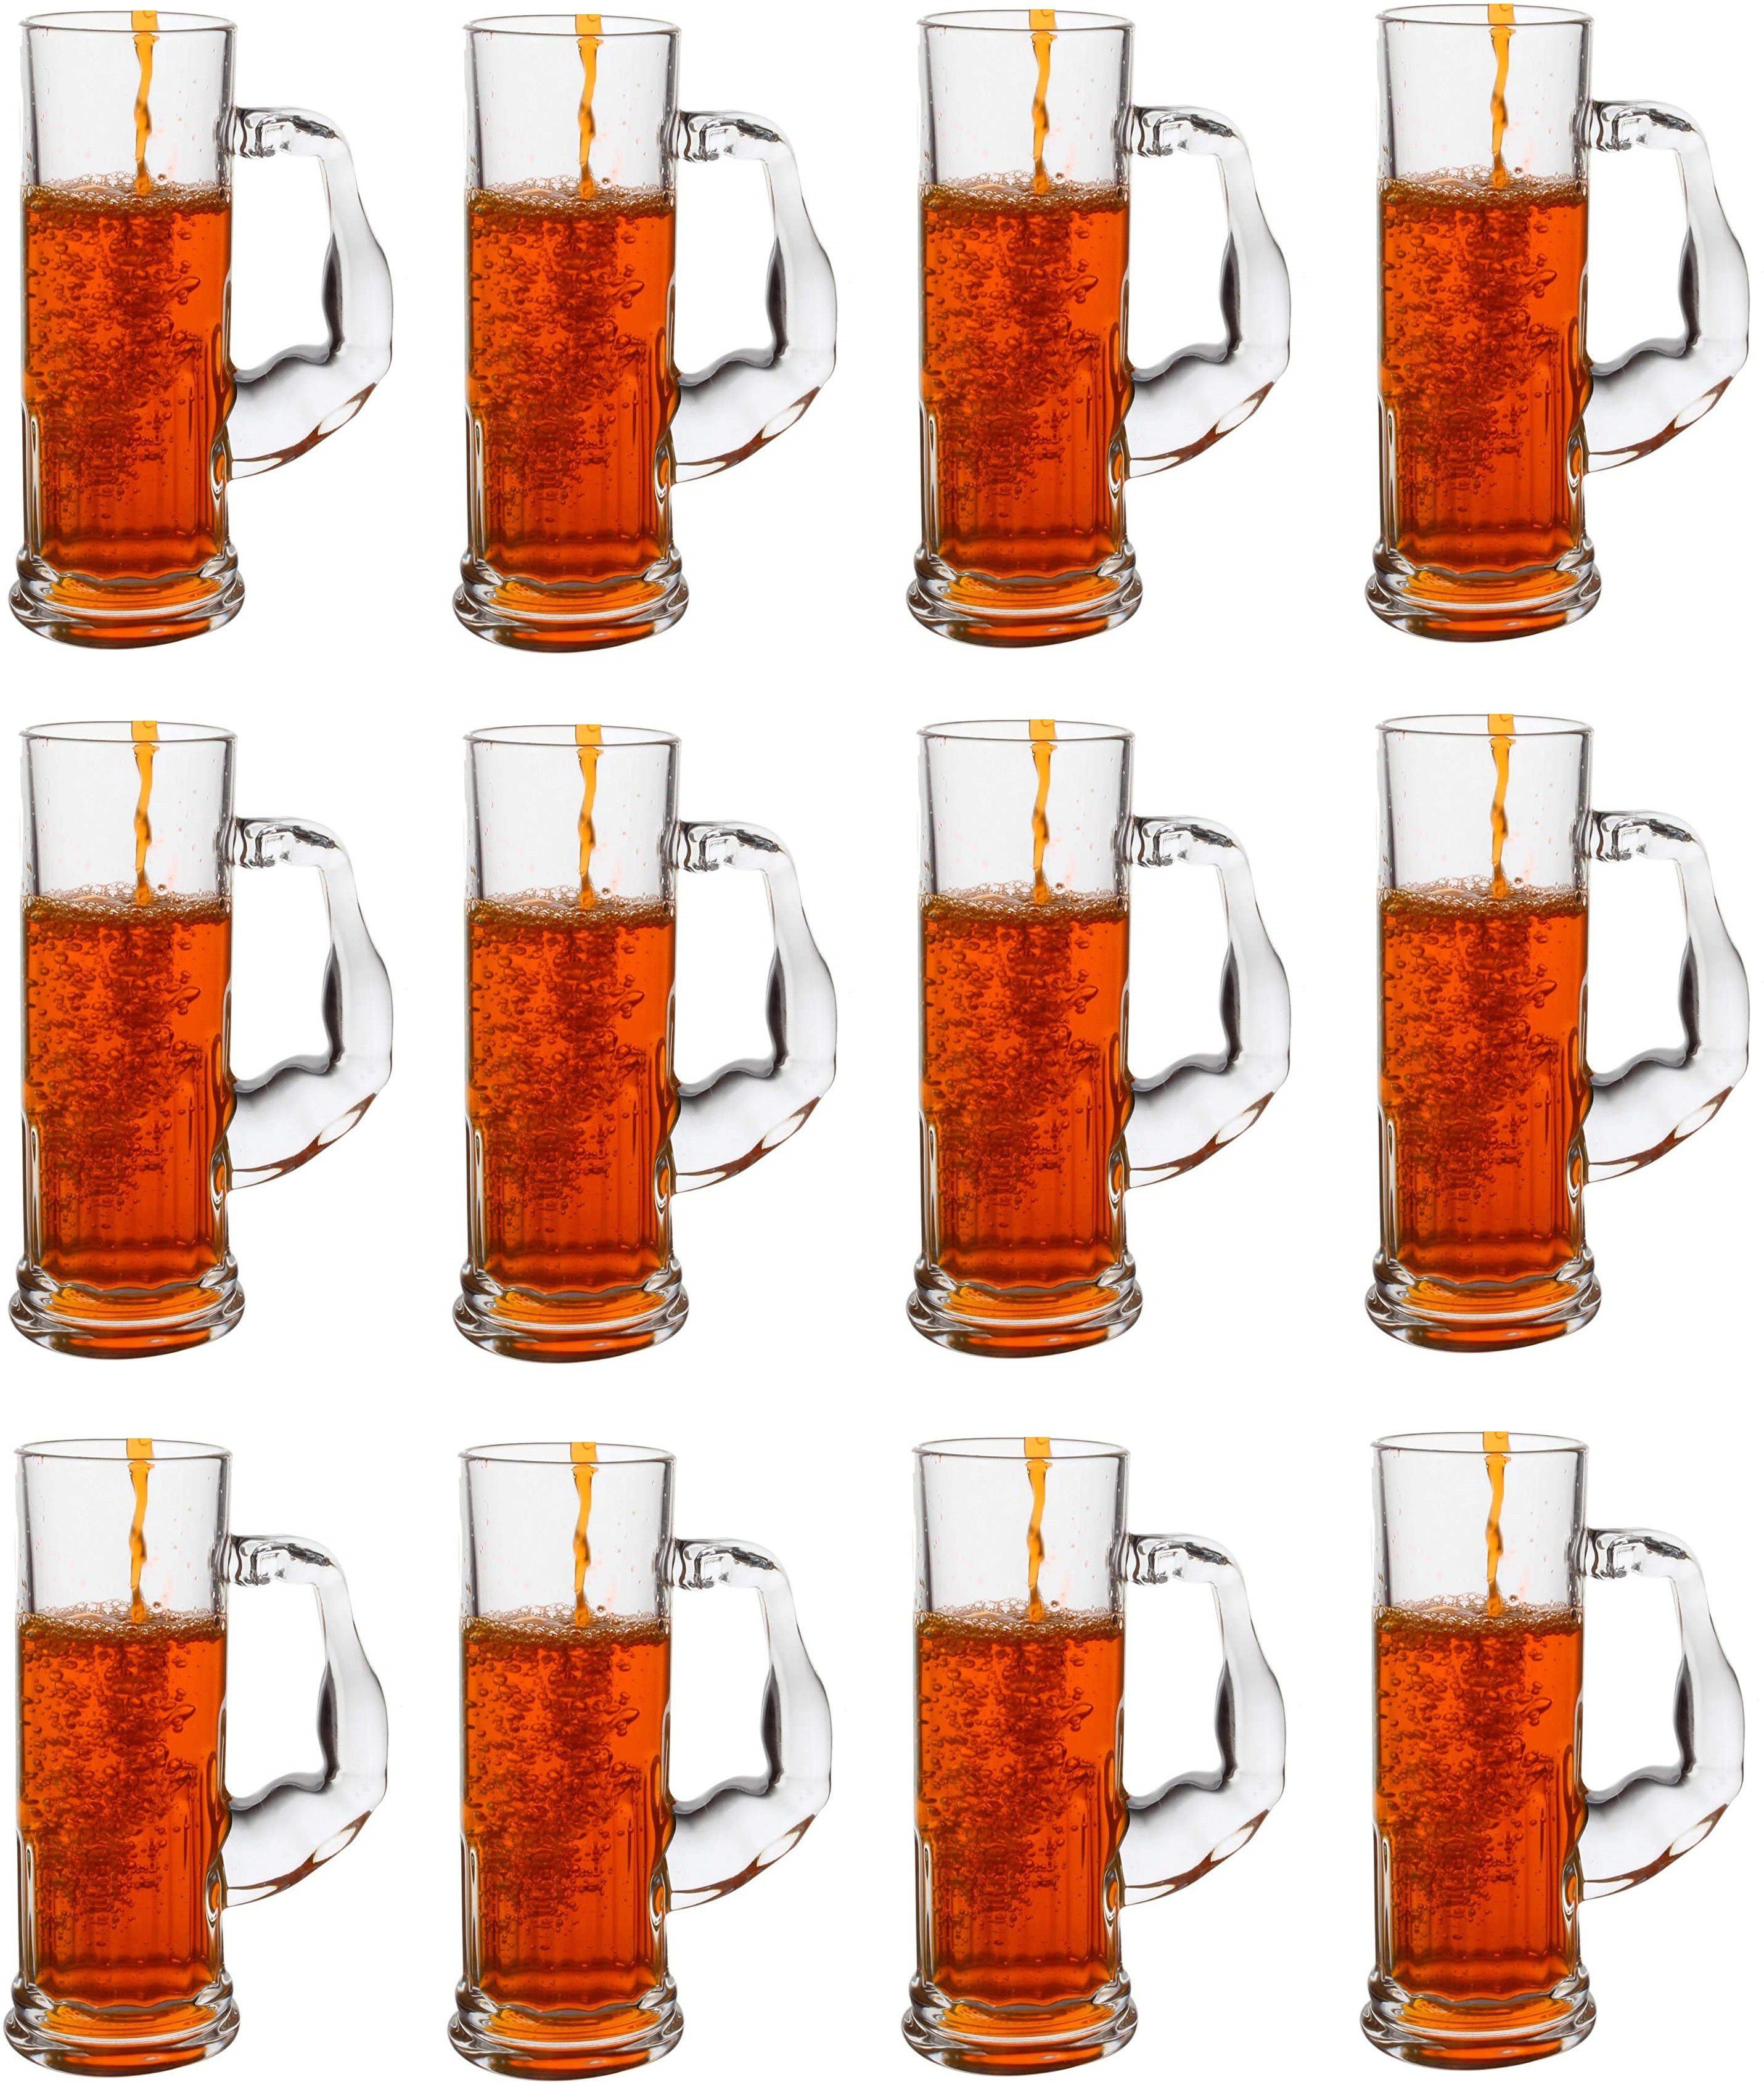     			1st Time A-73 Glass Beer Glasses & Mug 600 ml ( Pack of 12 )